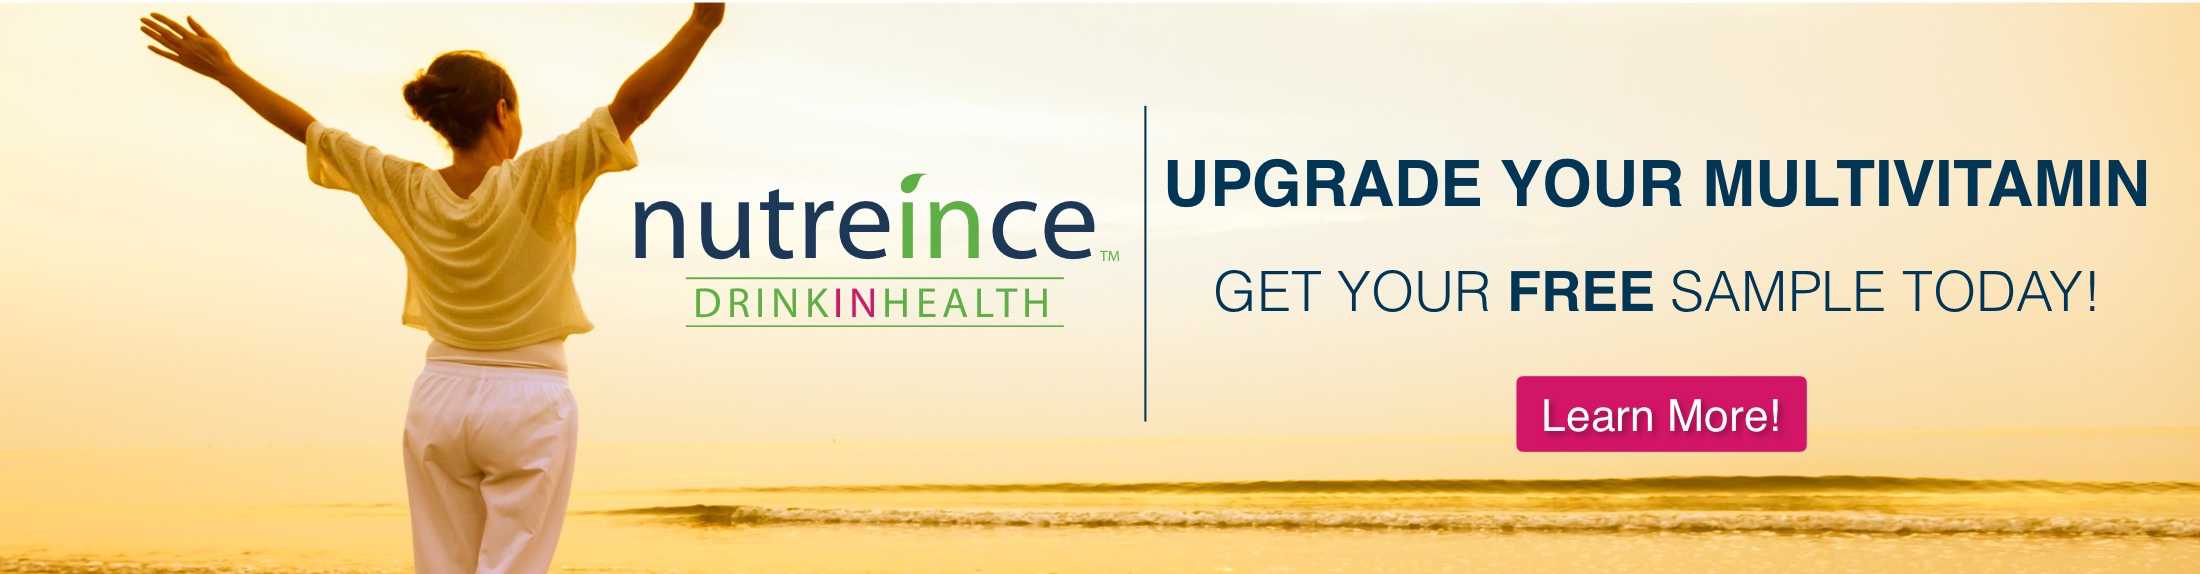 Modern Life Requires A Modern Multivitamin - Try Nutreince Today!